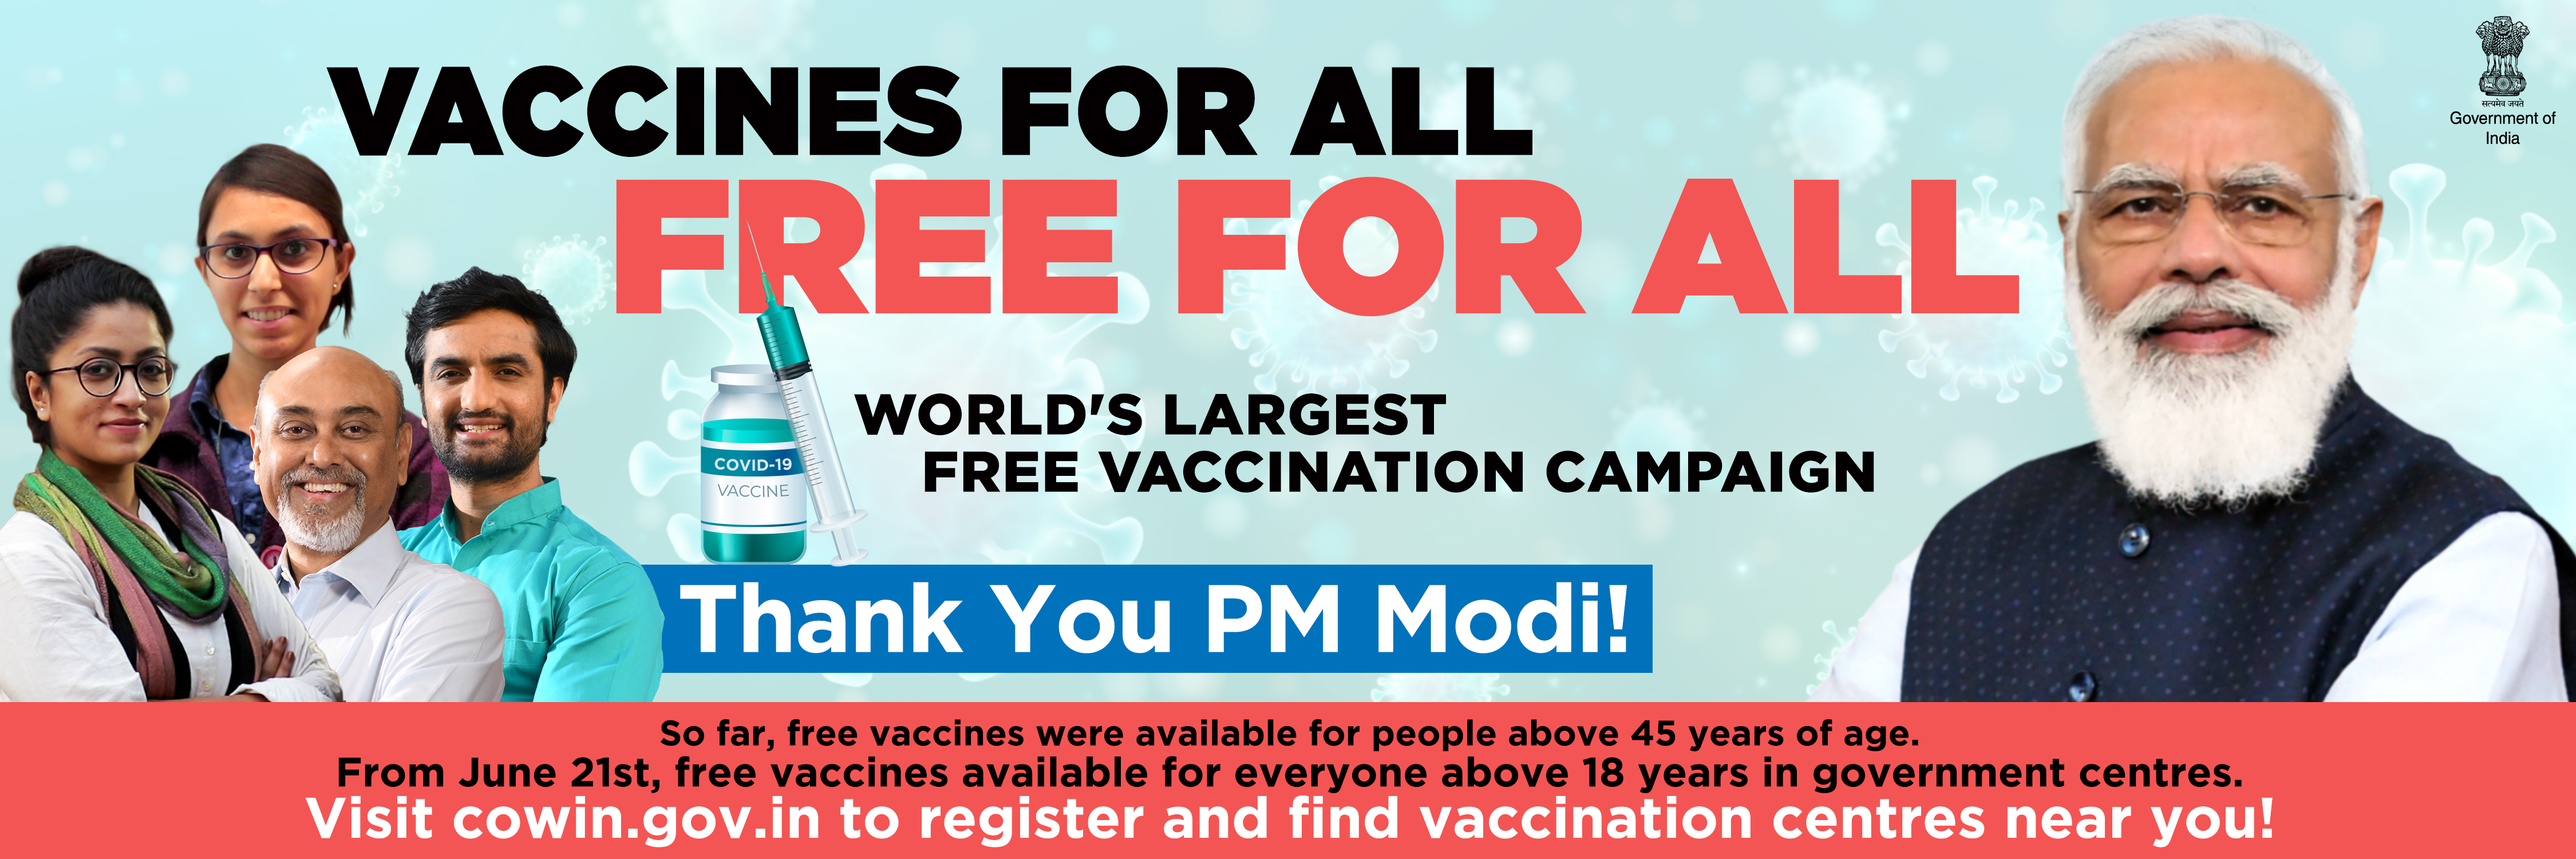 Vaccination for All Free for All